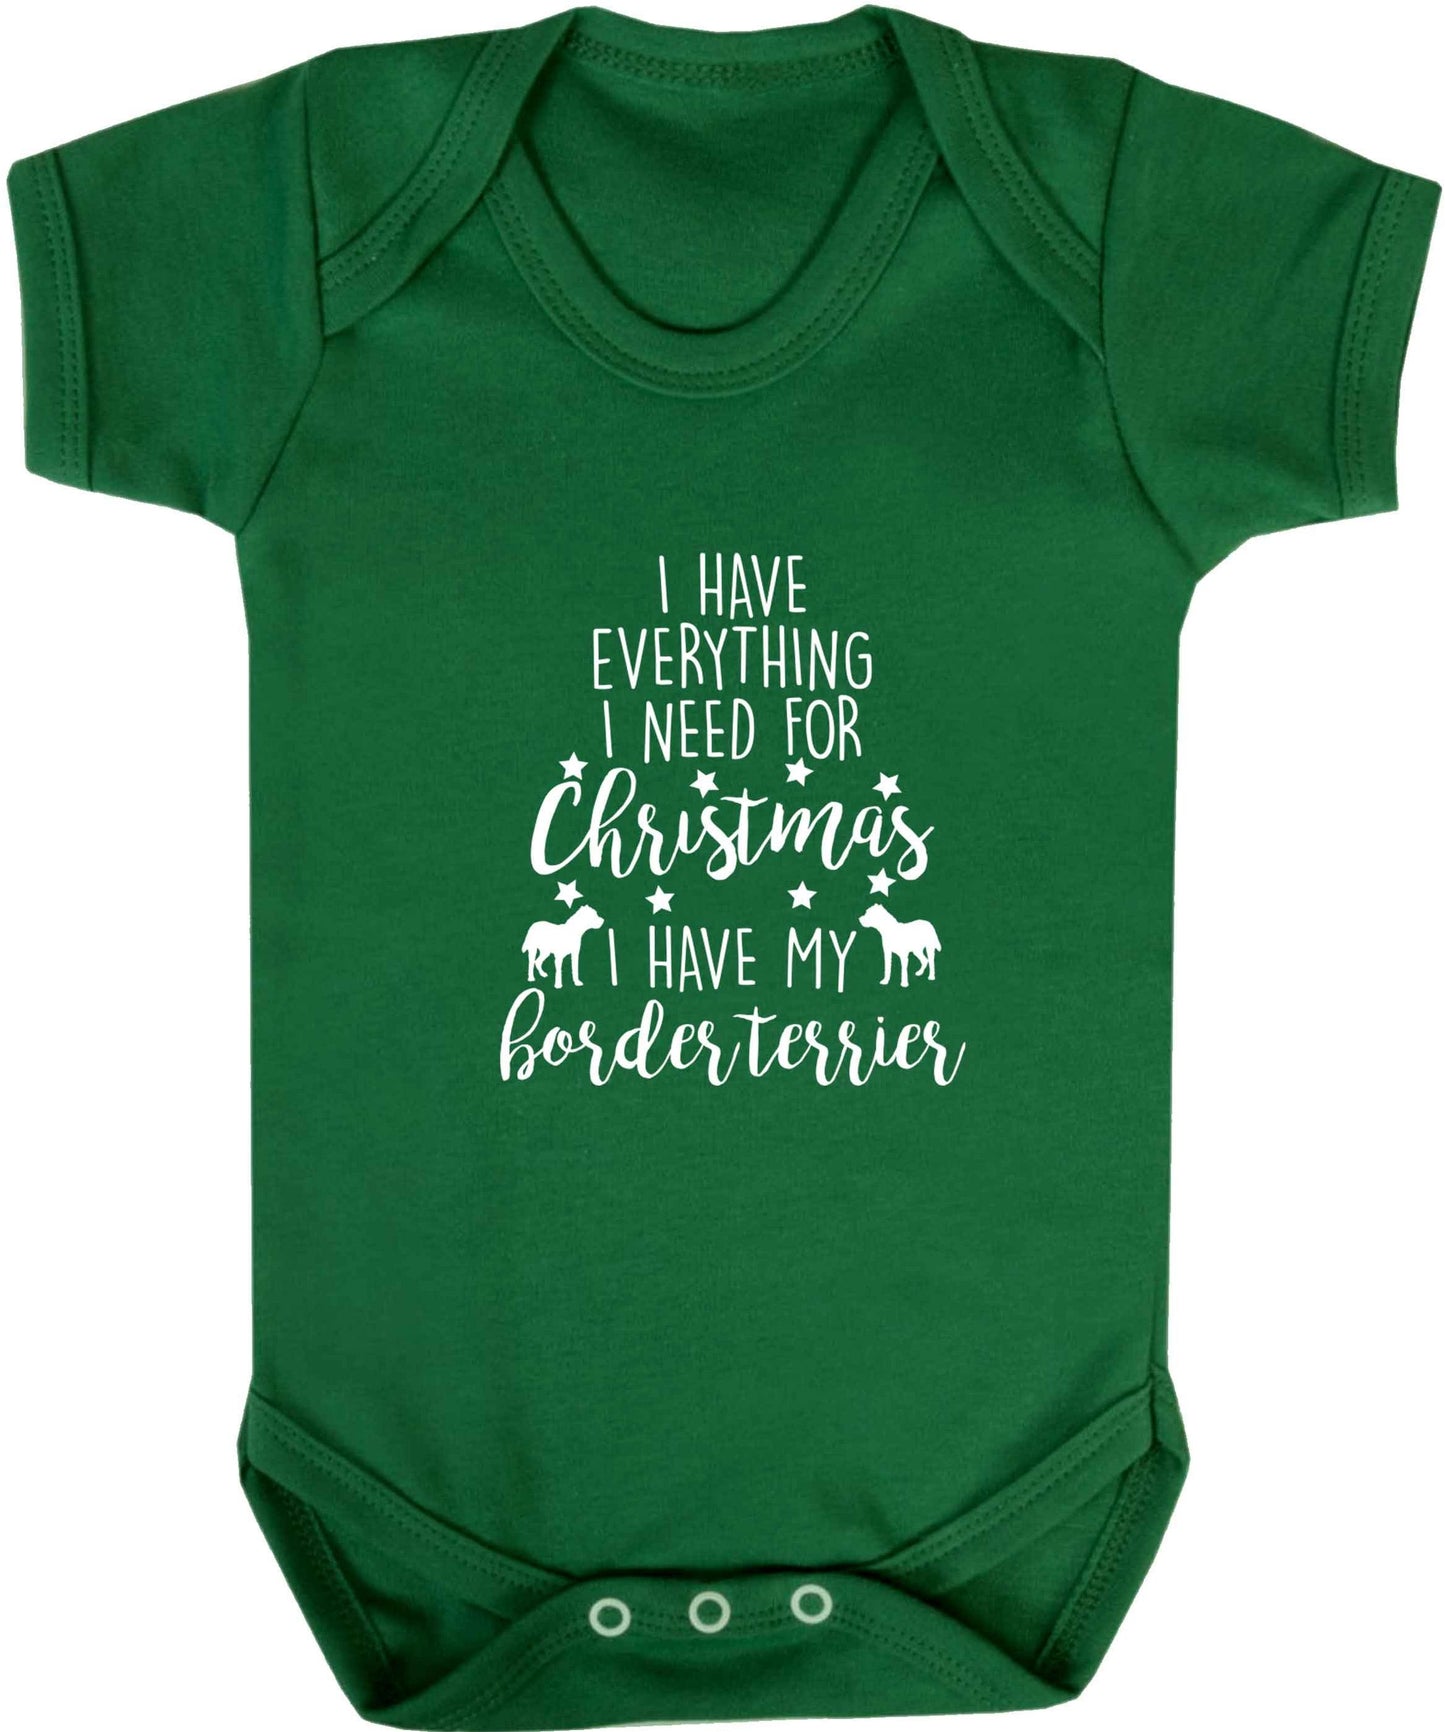 I have everything I need for Christmas I have my border terrier baby vest green 18-24 months